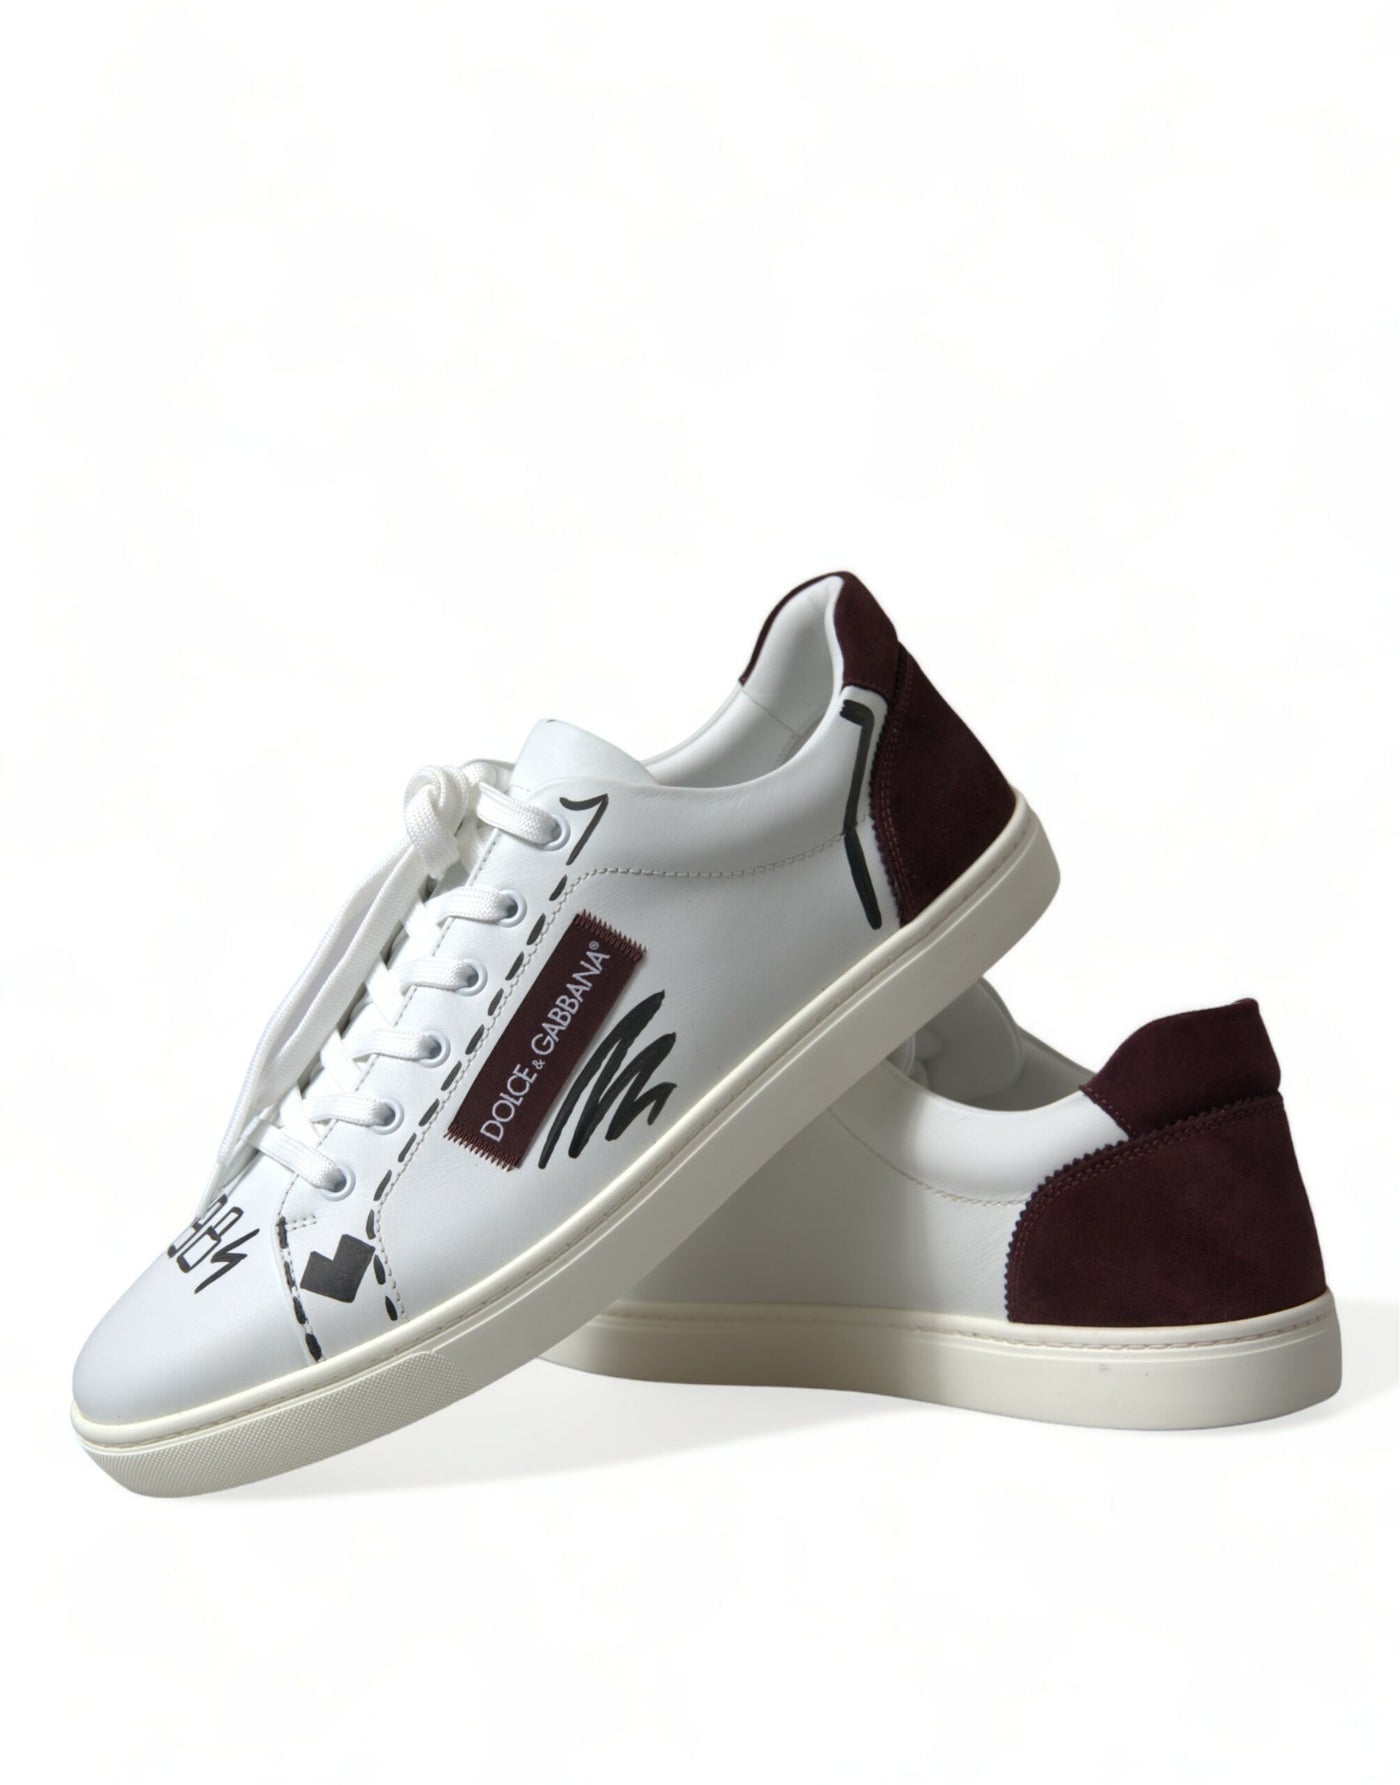 Dolce & Gabbana White Bordeaux Leather Logo Low Top Sneakers Shoes